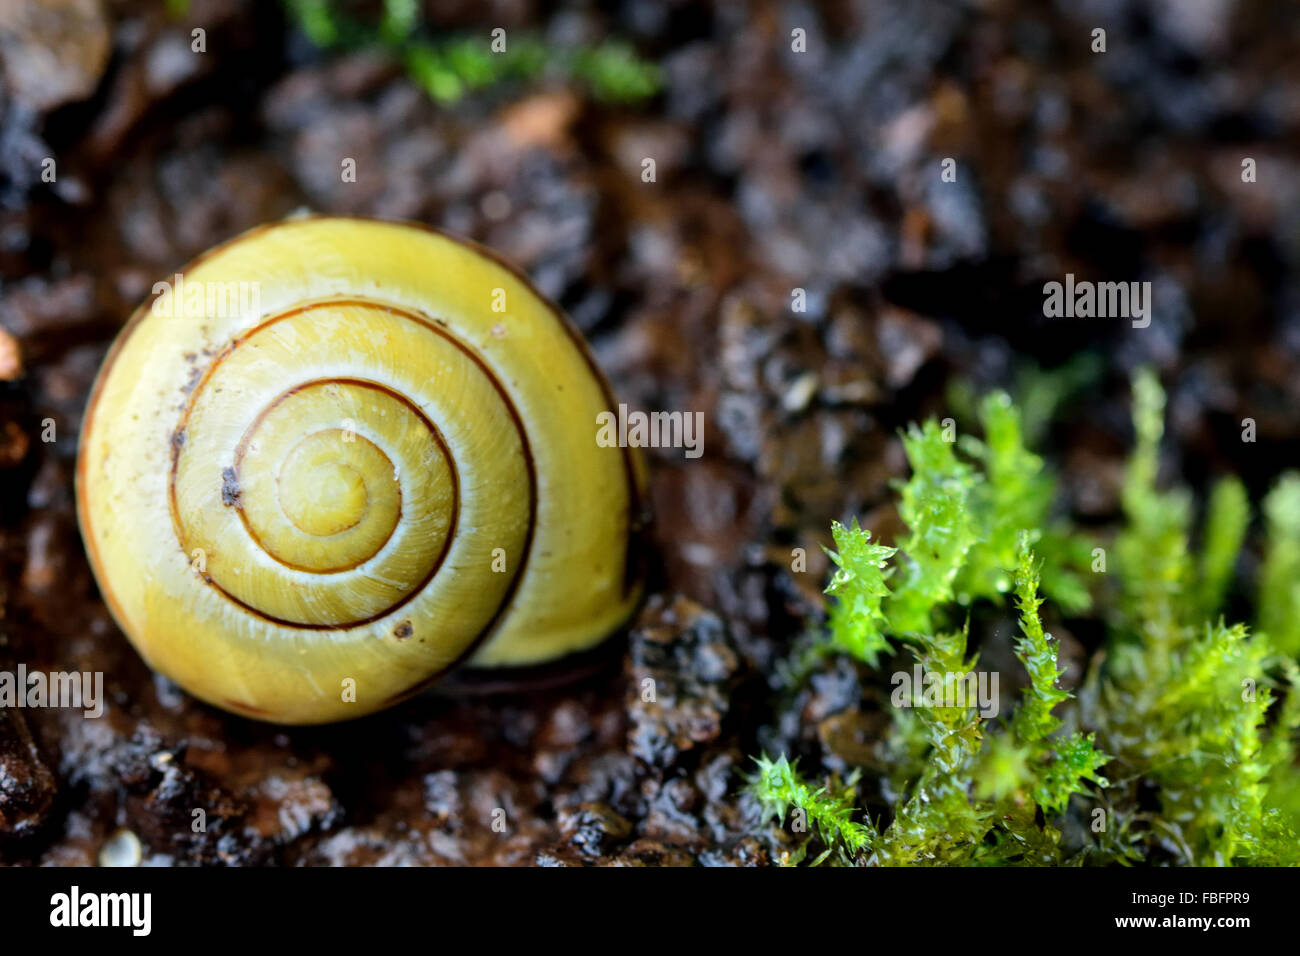 Brown-lipped snail (Cepaea nemoralis). A snail in the family Helicidae amongst dead wood and moss Stock Photo